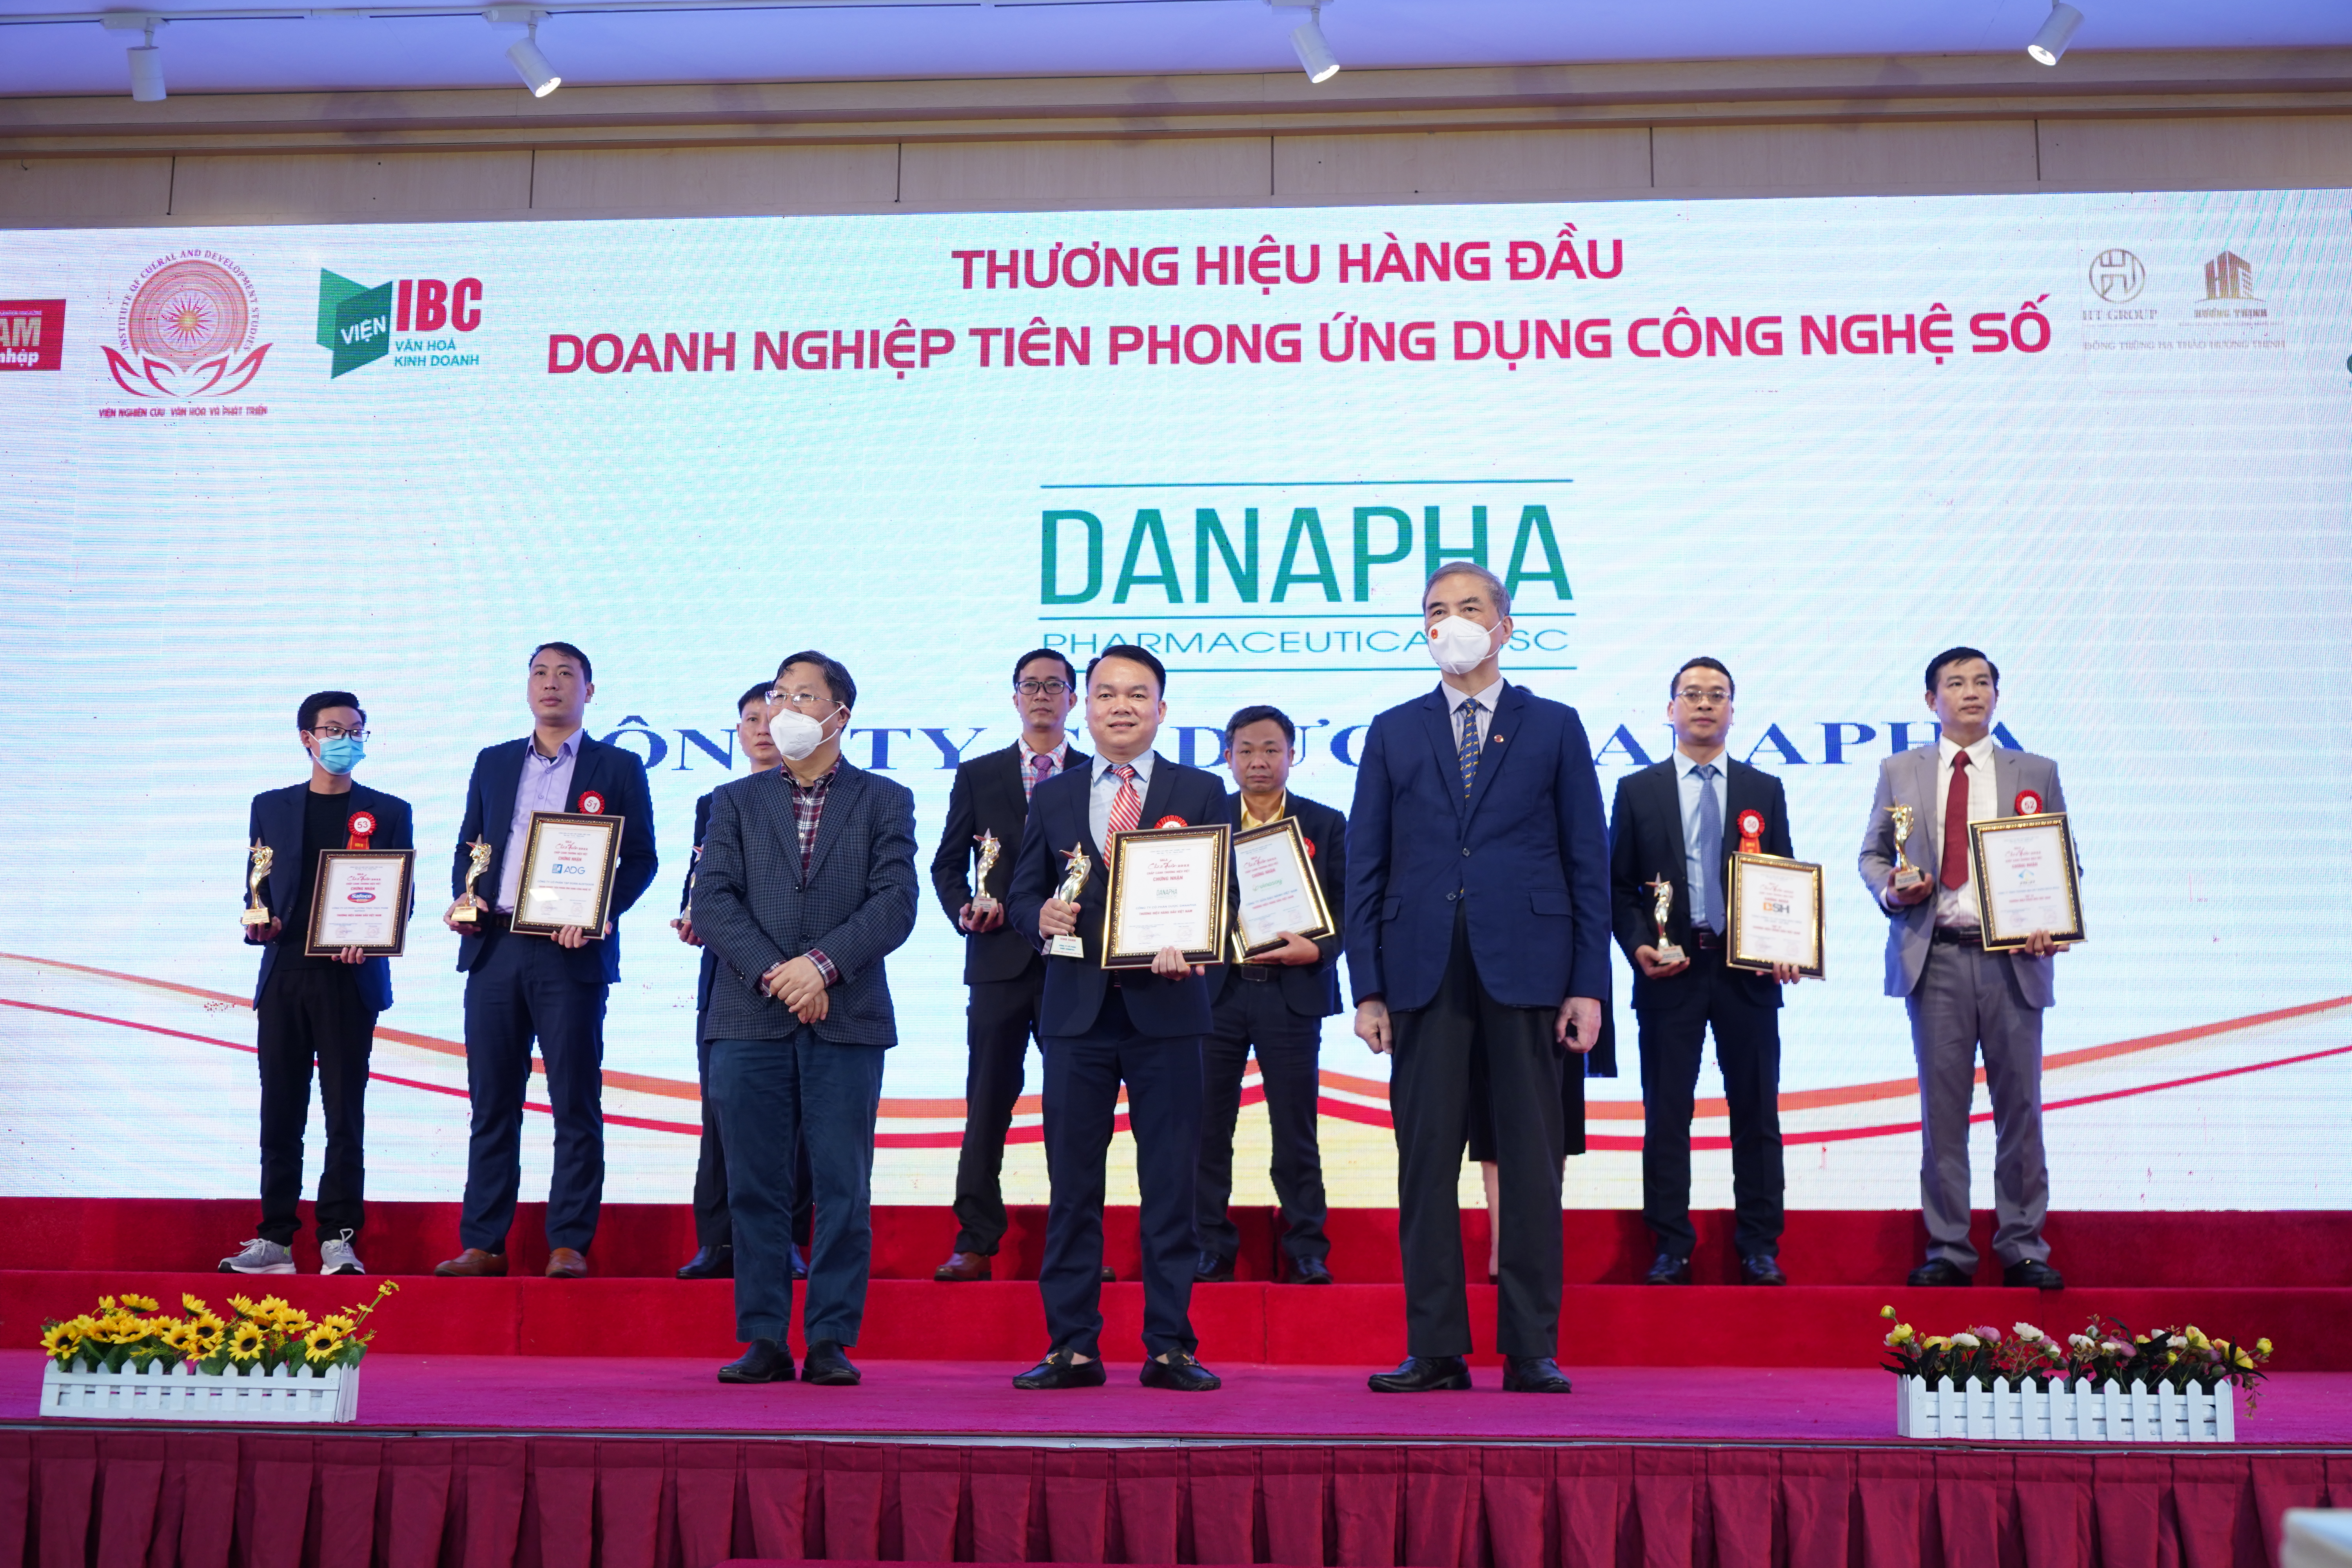 DANAPHA PHARMACEUTICAL - LEVERAGE AND GIVE VIETNAMESE BRANDS WINGS 